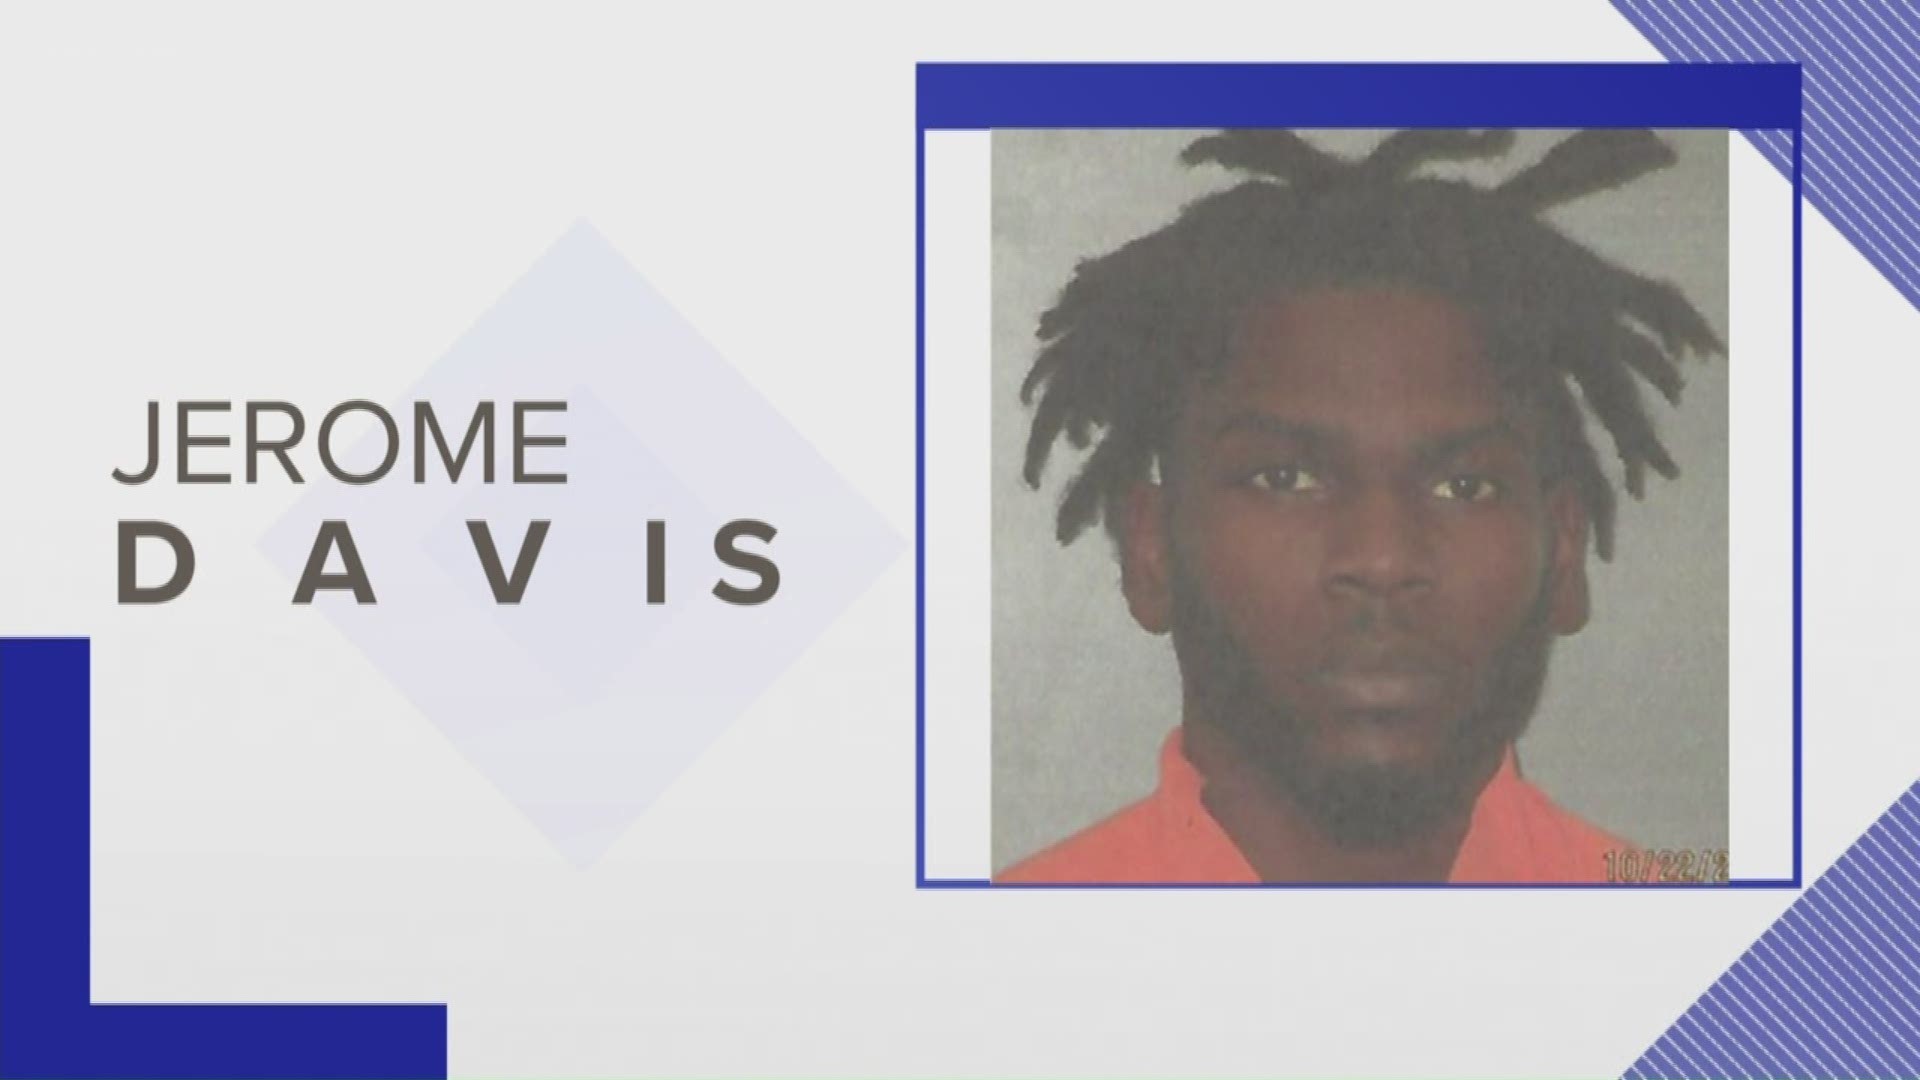 He's Jerome Davis, 27, was the second arrest in connection to the death of a Kingstree postal worker